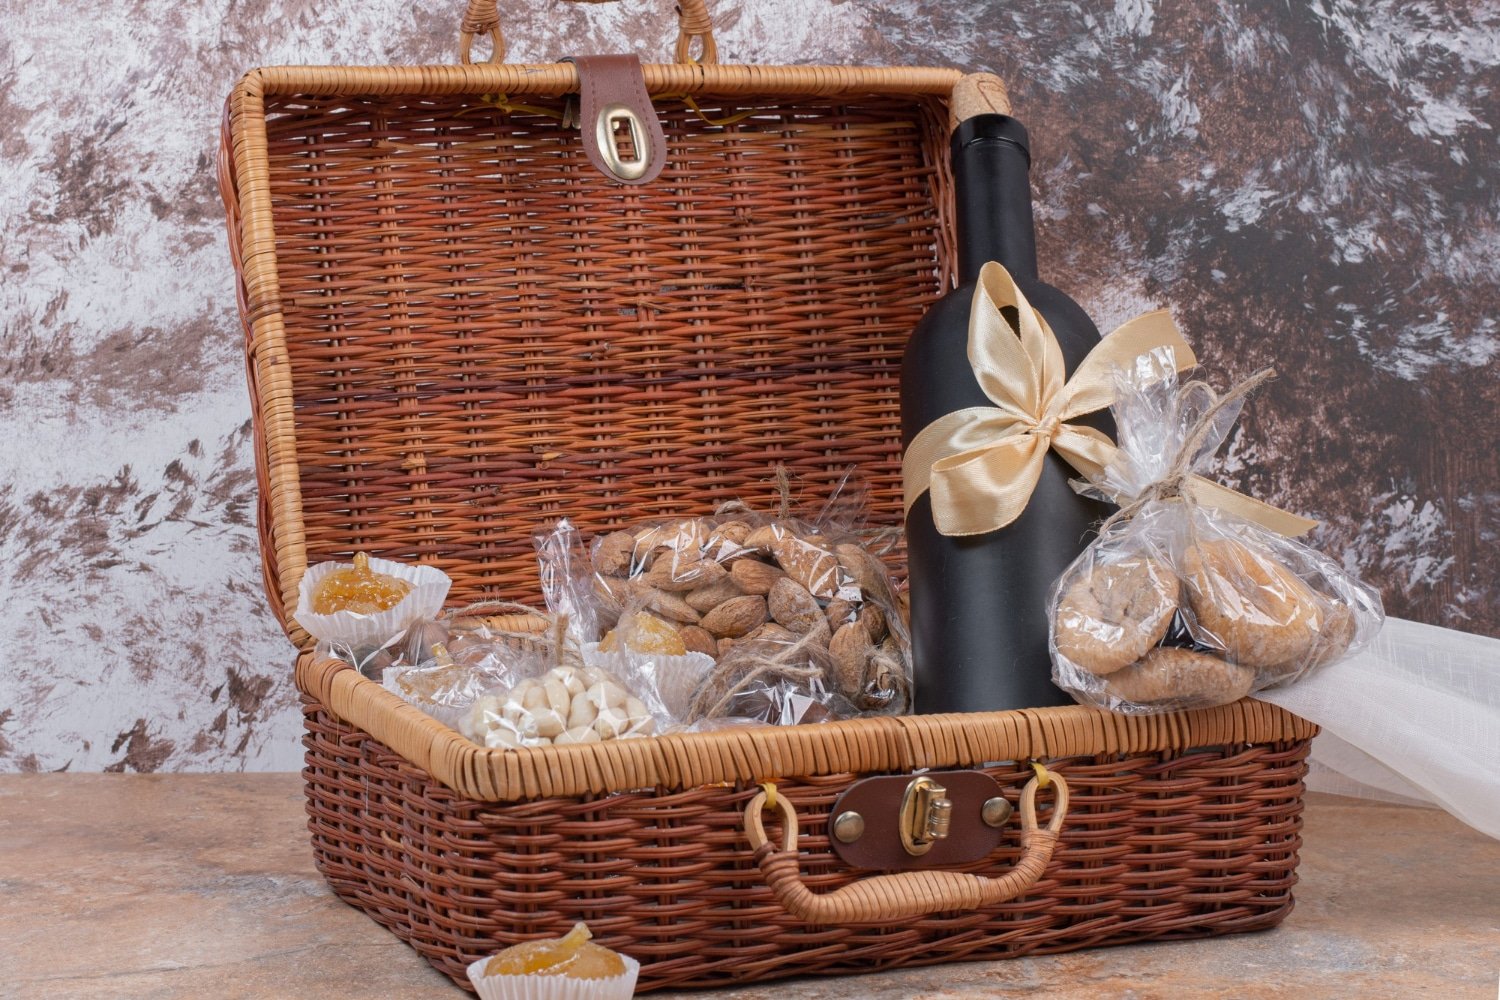 You are currently viewing GourmetGiftBaskets.com: Gifting Made Easy with Unique and Delicious Baskets